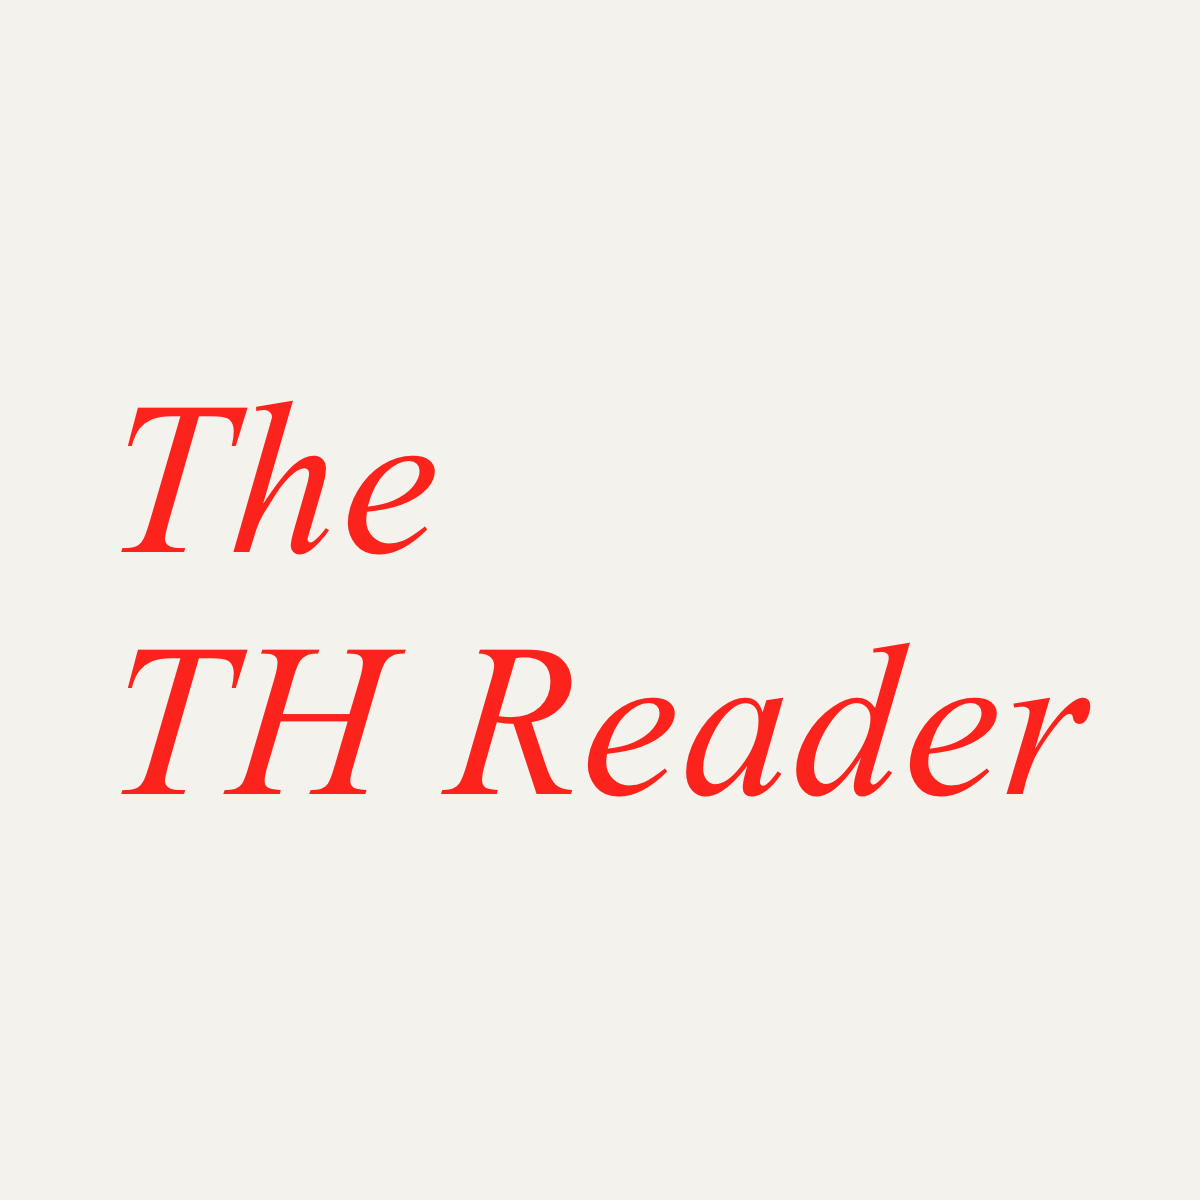 The TH Reader